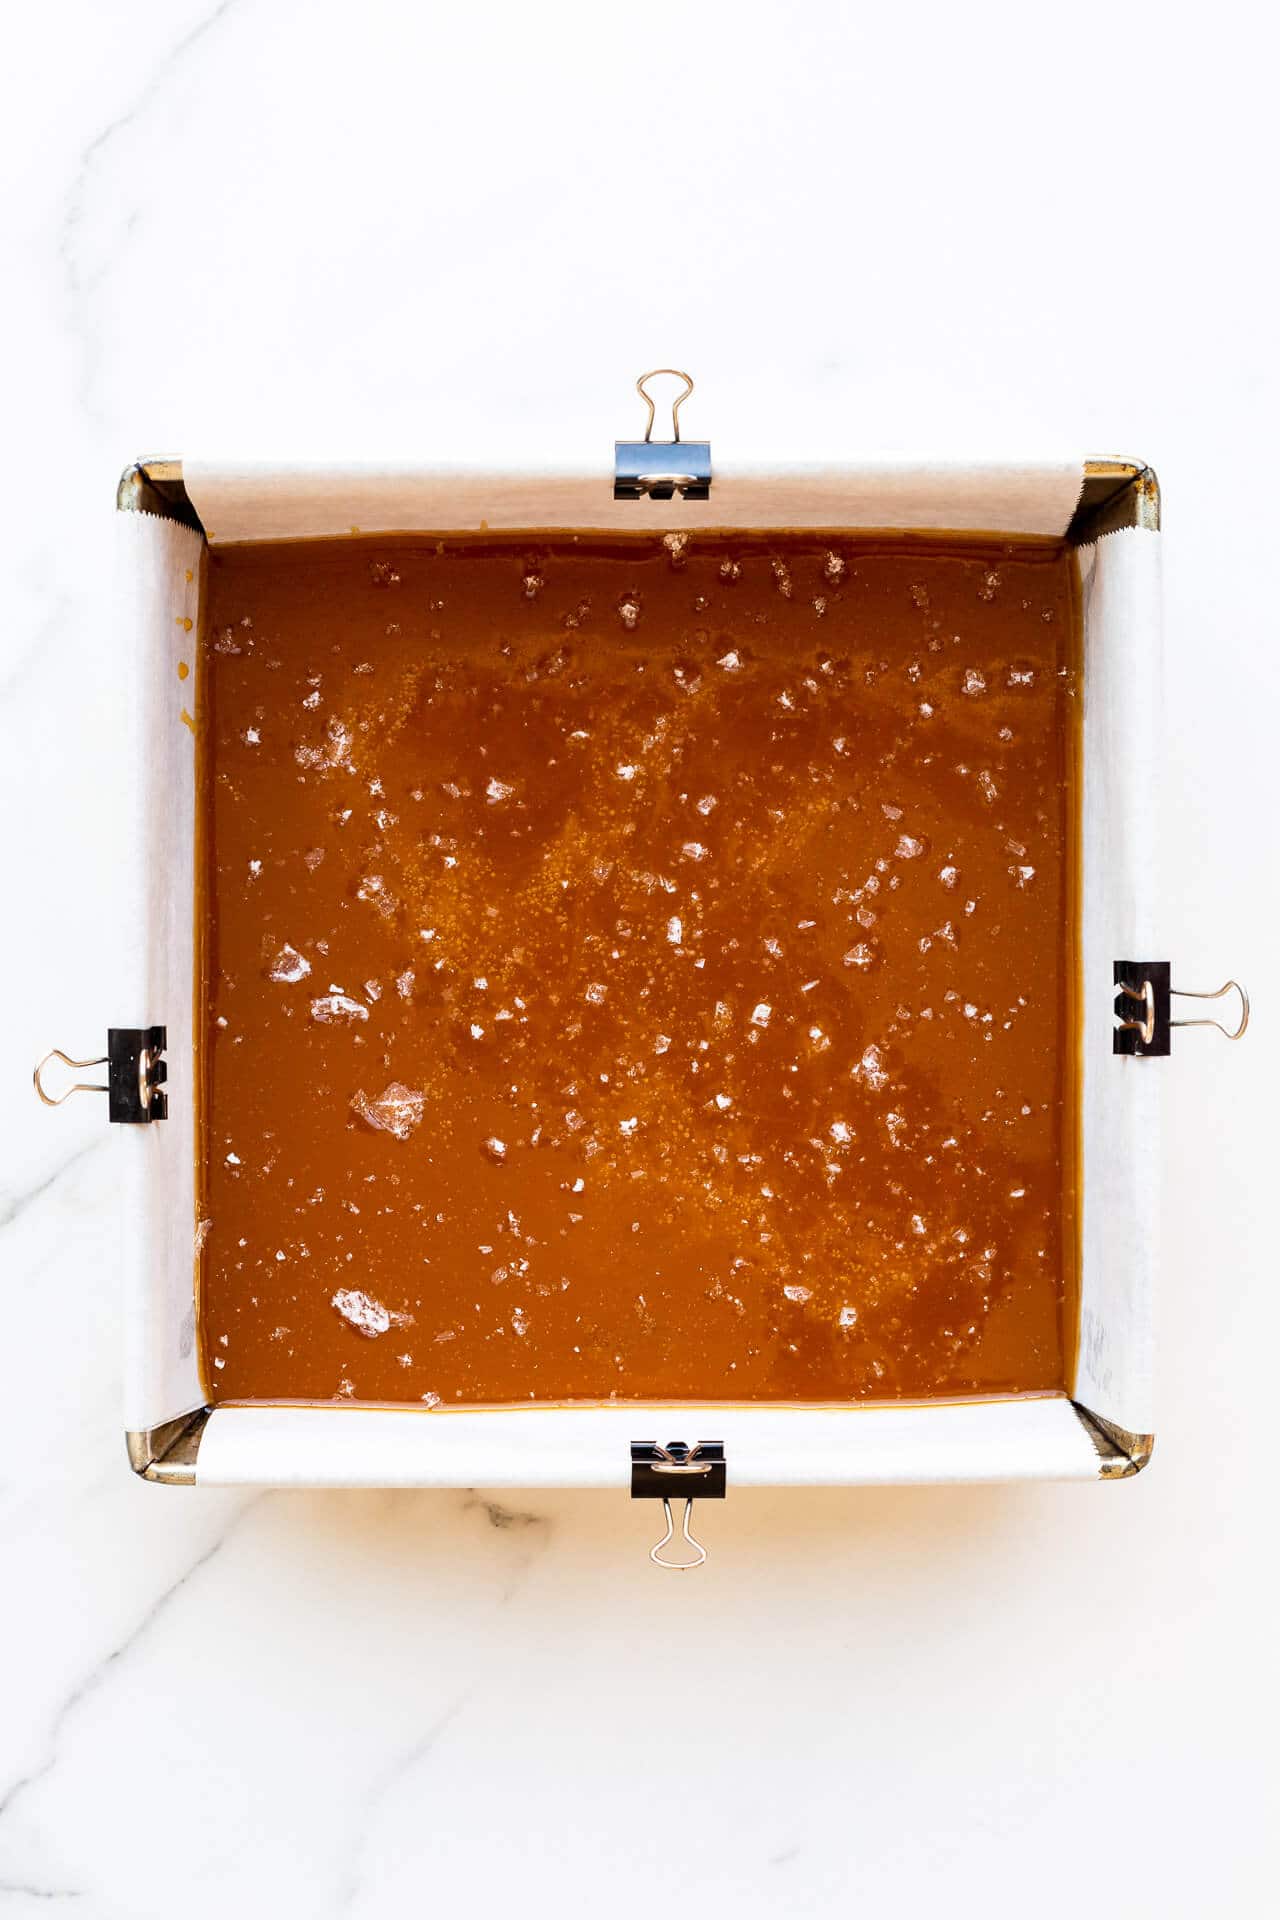 Caramels setting in an 8x8 pan lined with parchment paper clipped to sides of pan to hold it in place